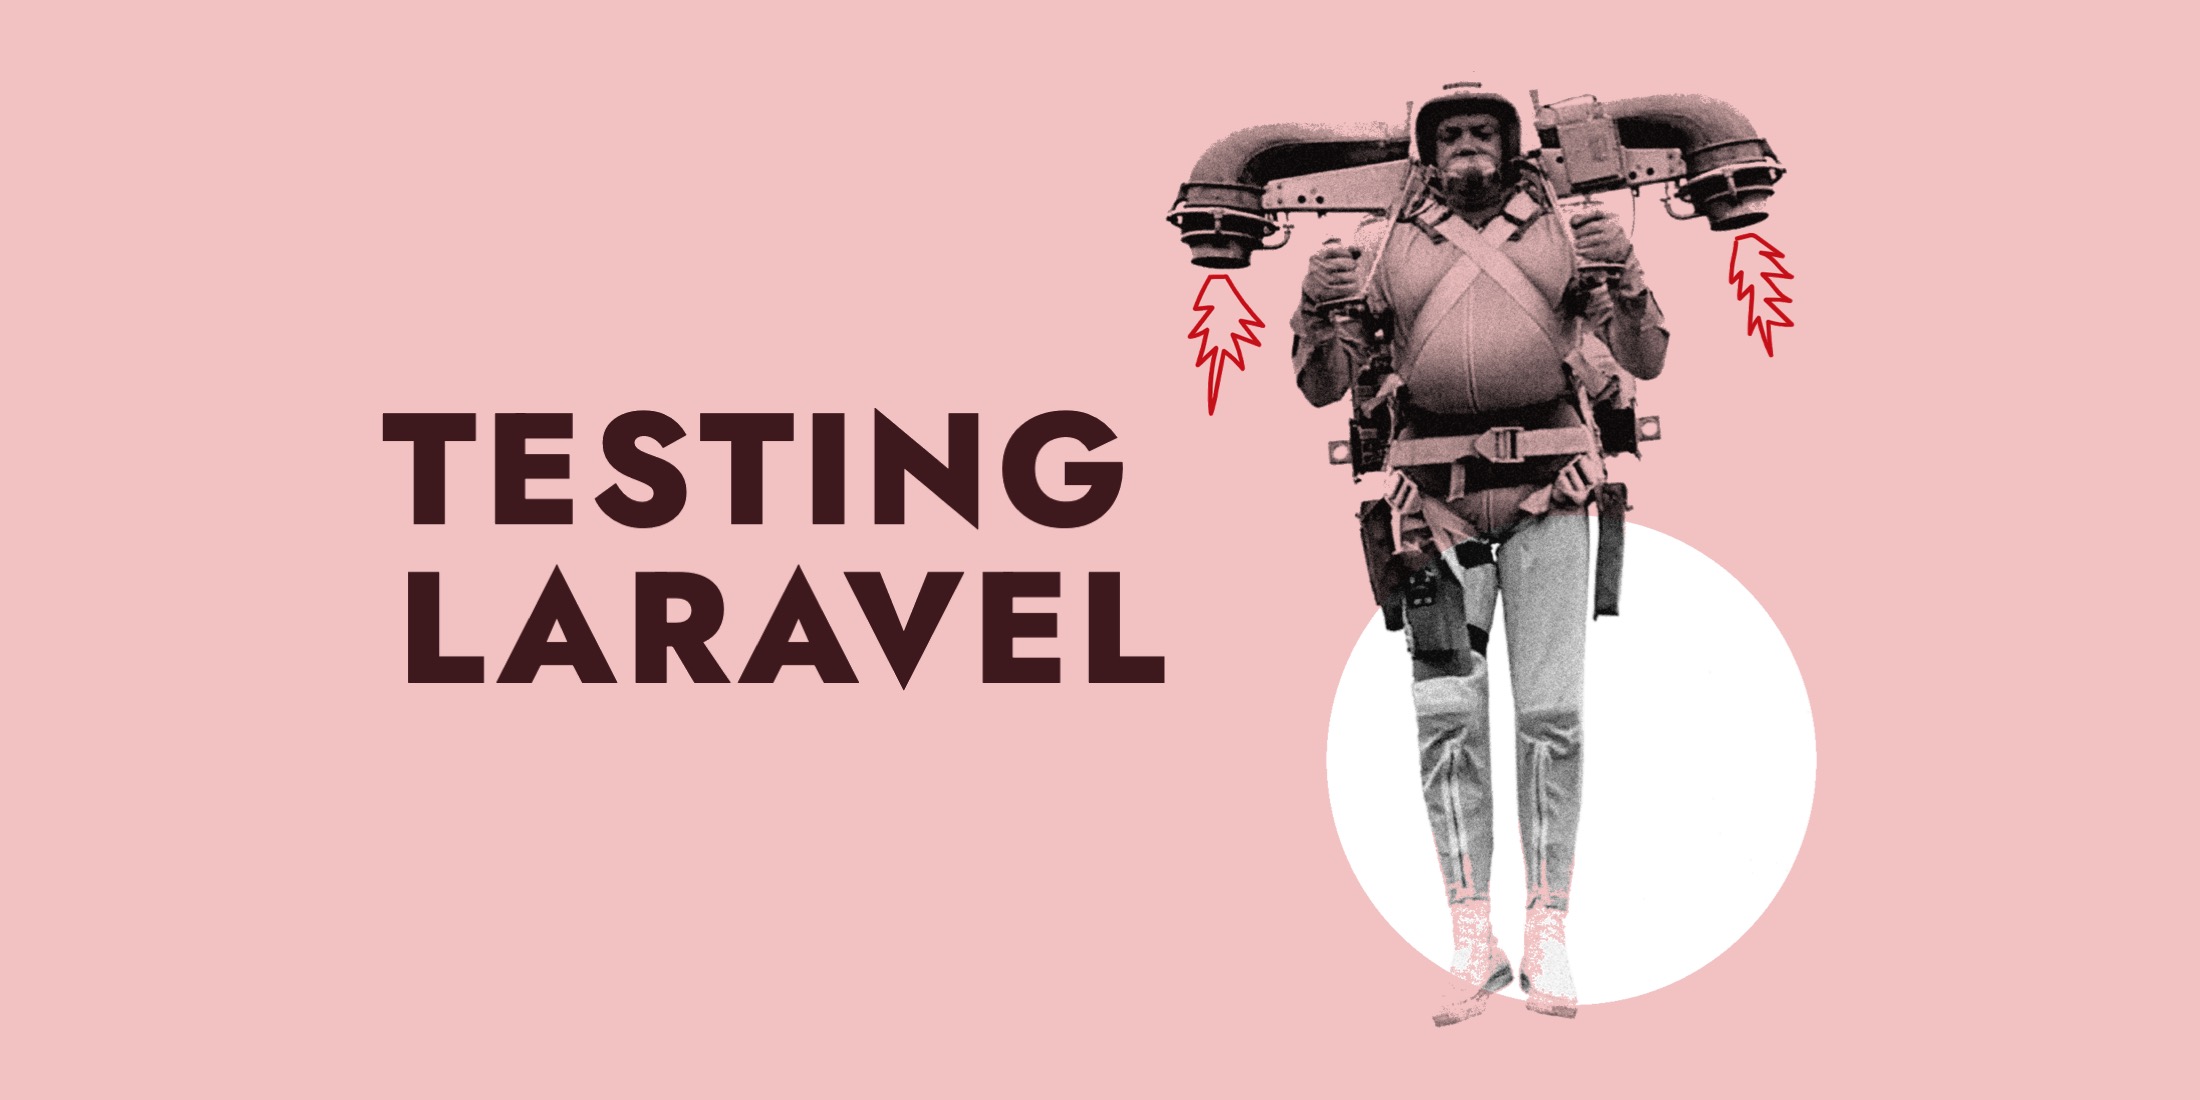 How to test Laravel applications image